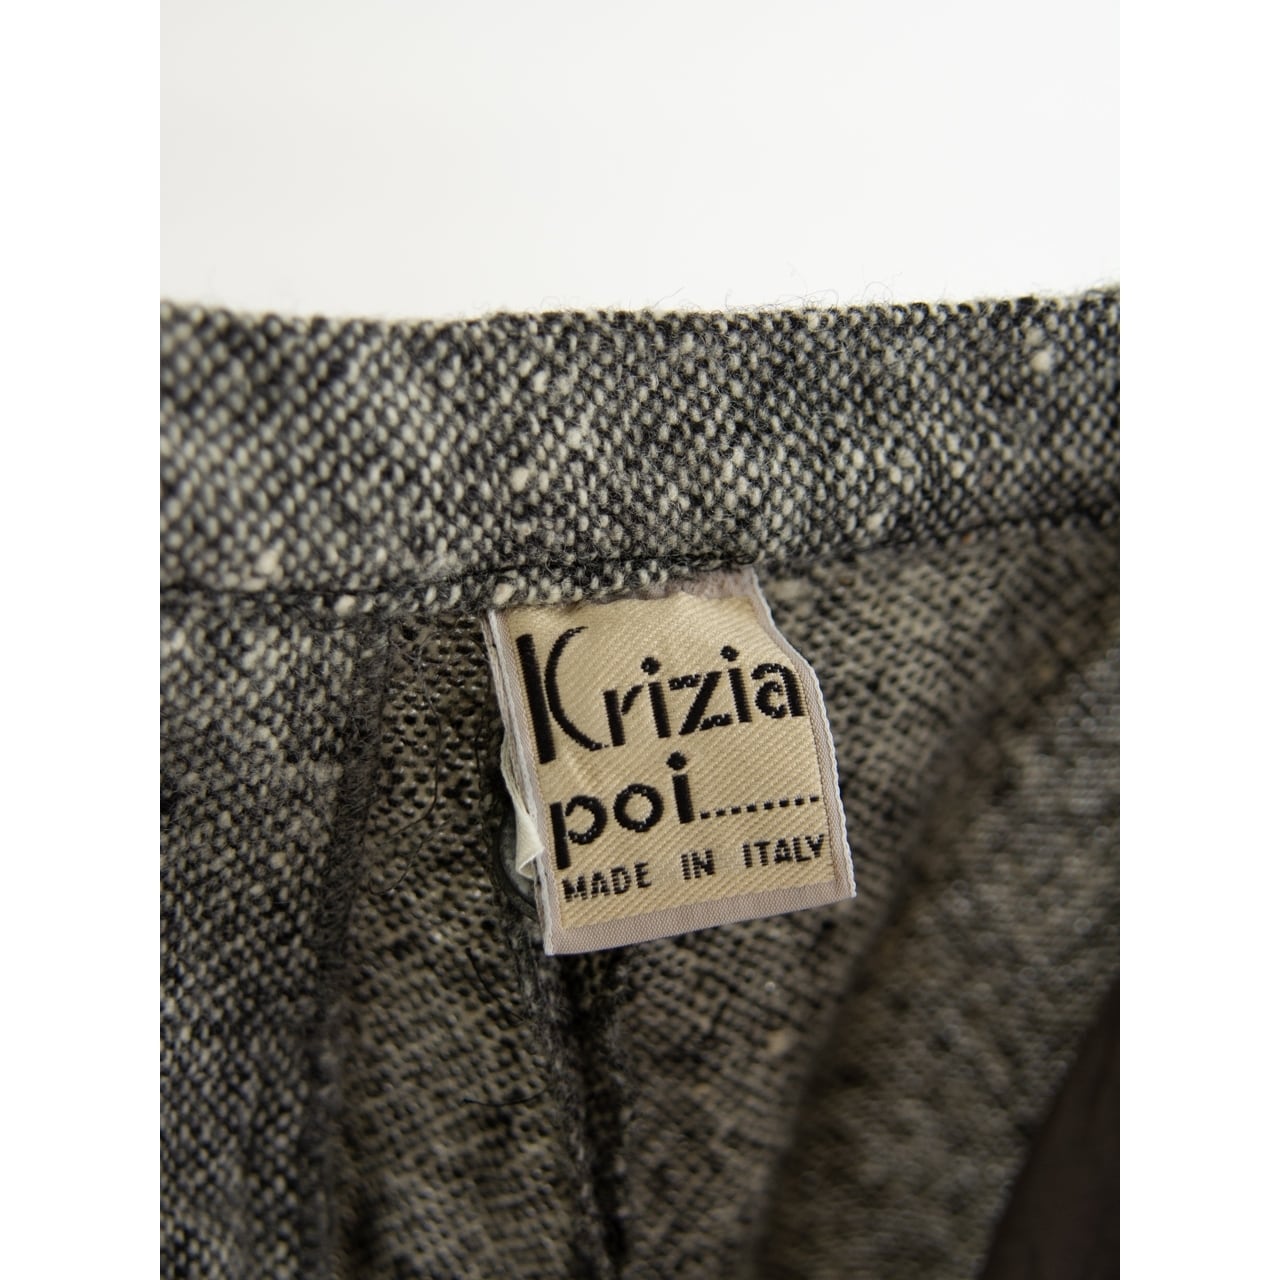 Krizia poi】Made in Italy 70-80's 100% Wool Tweed 2tuck Pants